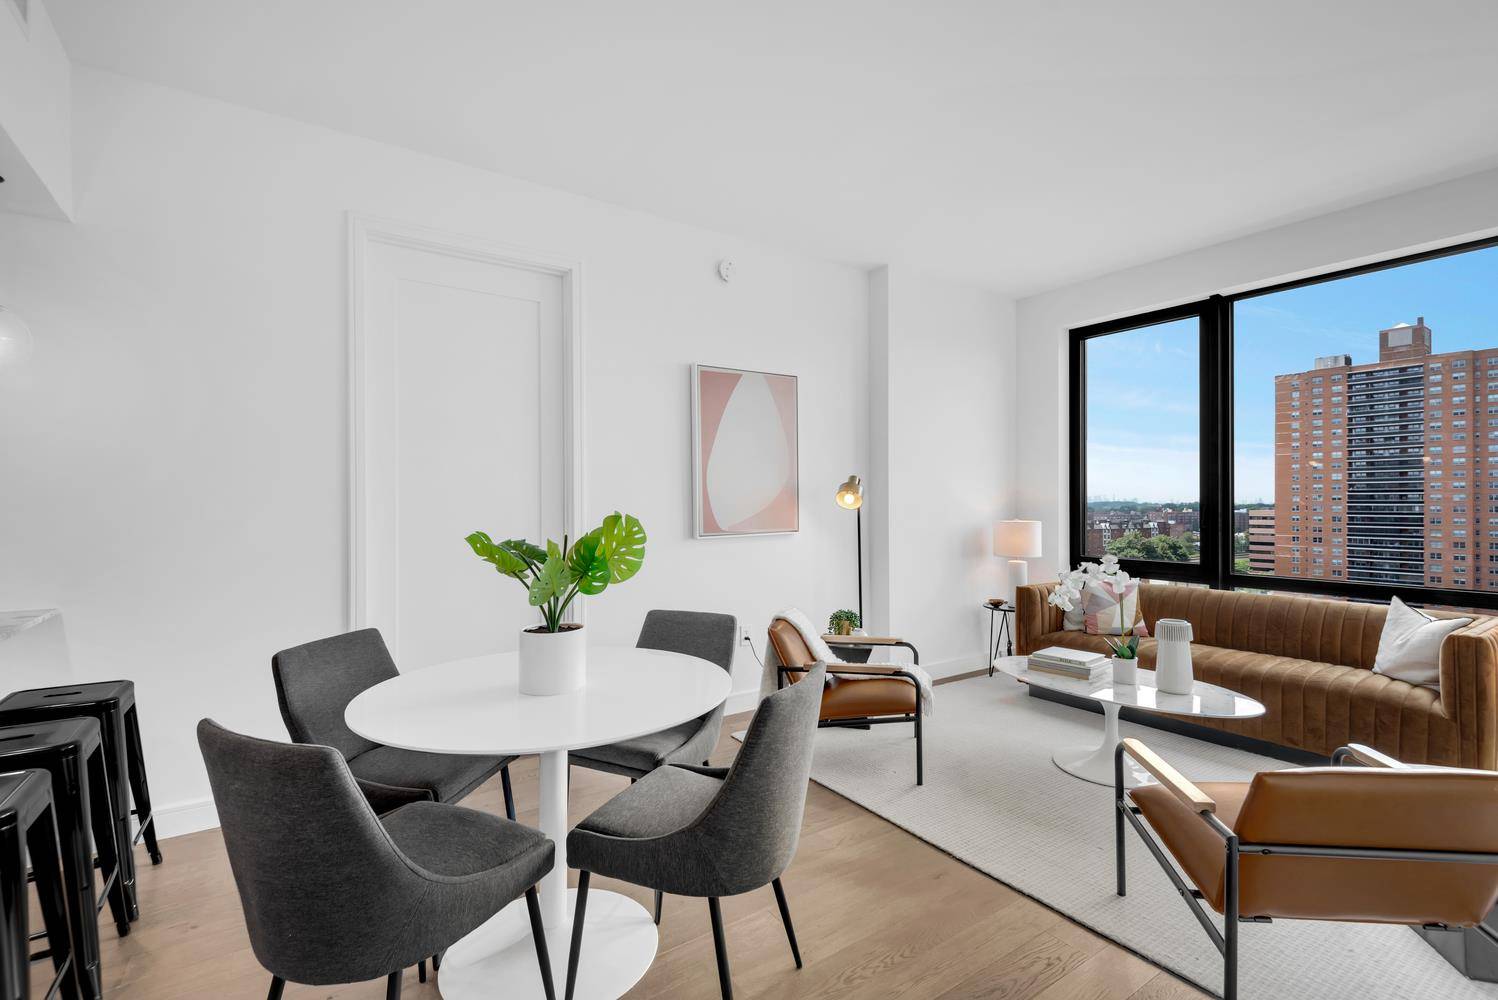 Introducing Residence 9C at BLVD, a stunning two bedroom, two bathroom condominium with balcony that offers an unparalleled living experience in the heart of Forest Hills.